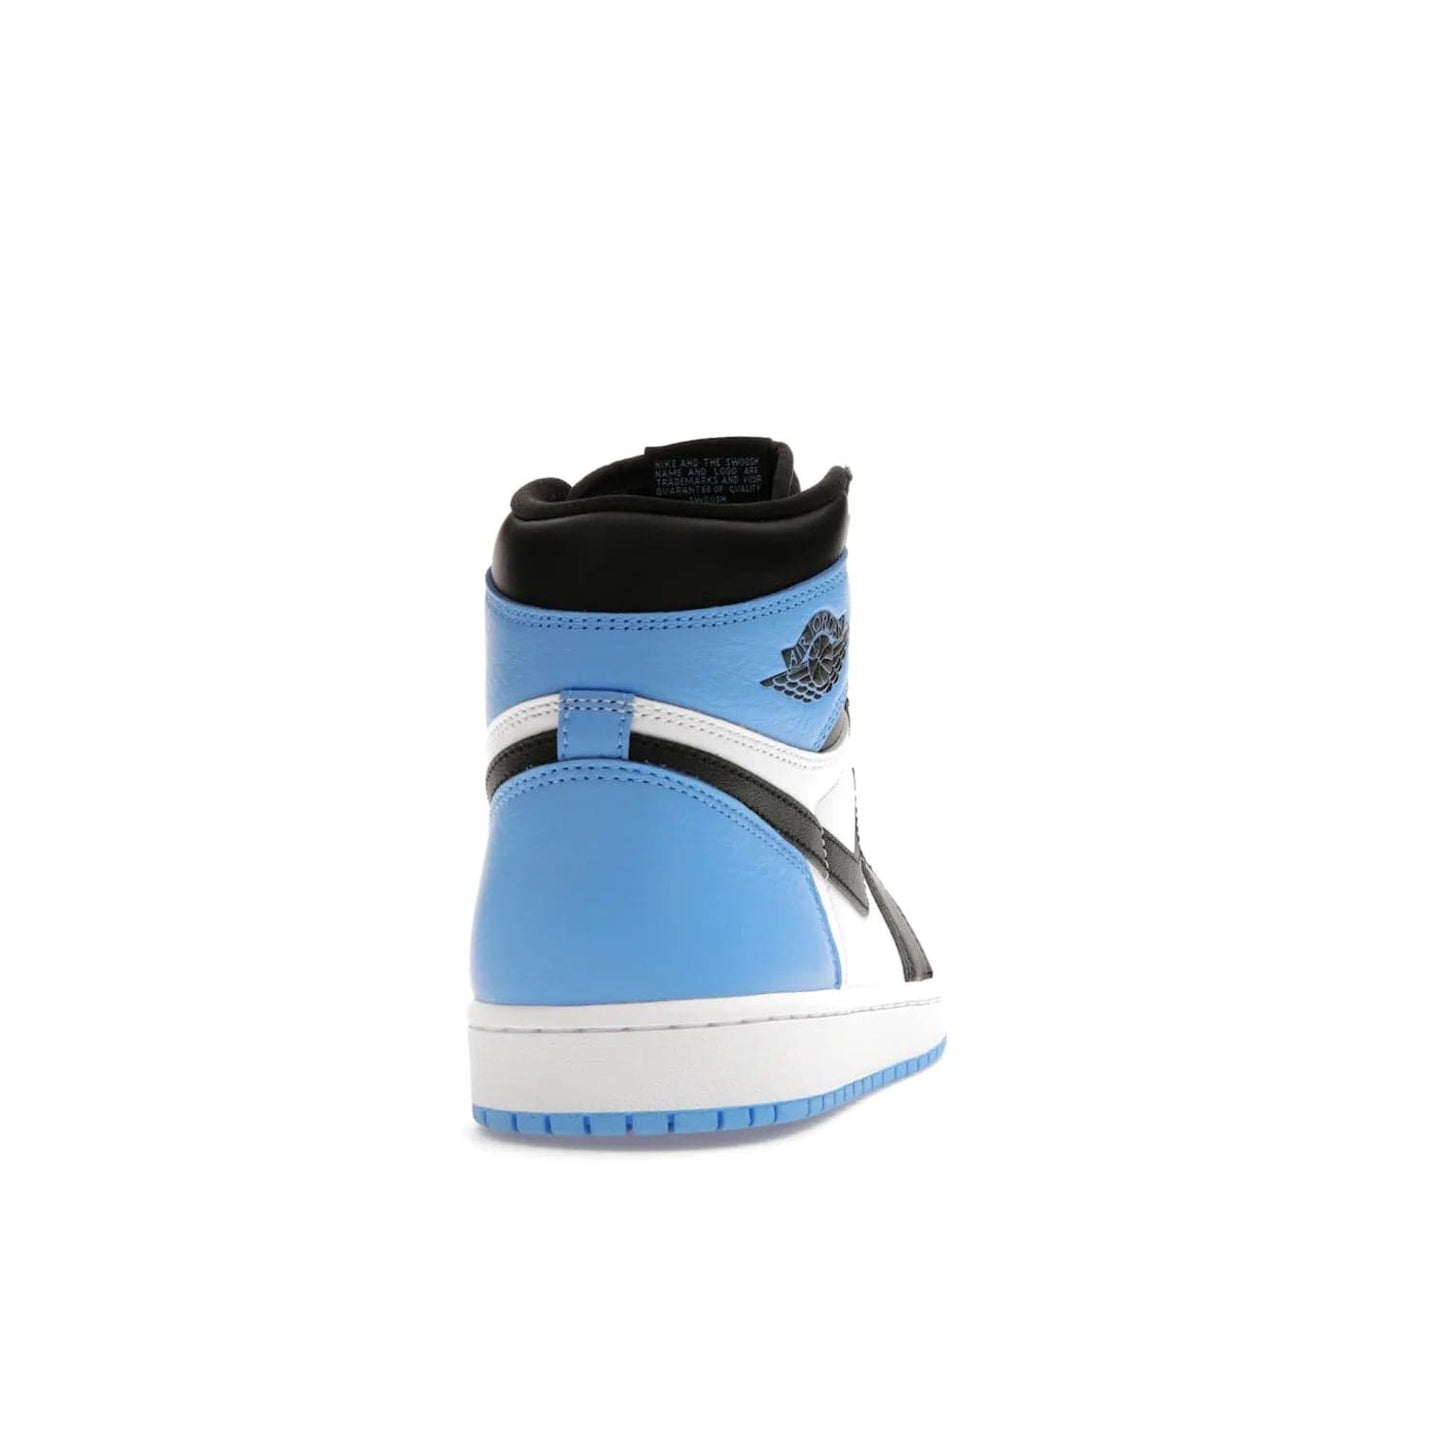 Jordan 1 Retro High OG UNC Toe - Image 29 - Only at www.BallersClubKickz.com - Jordan 1 High OG UNC Toe is a fashionable, high-quality sneaker featuring University Blue, Black White and White. Releasing July 22, 2023, it's the perfect pick up for sneakerheads.